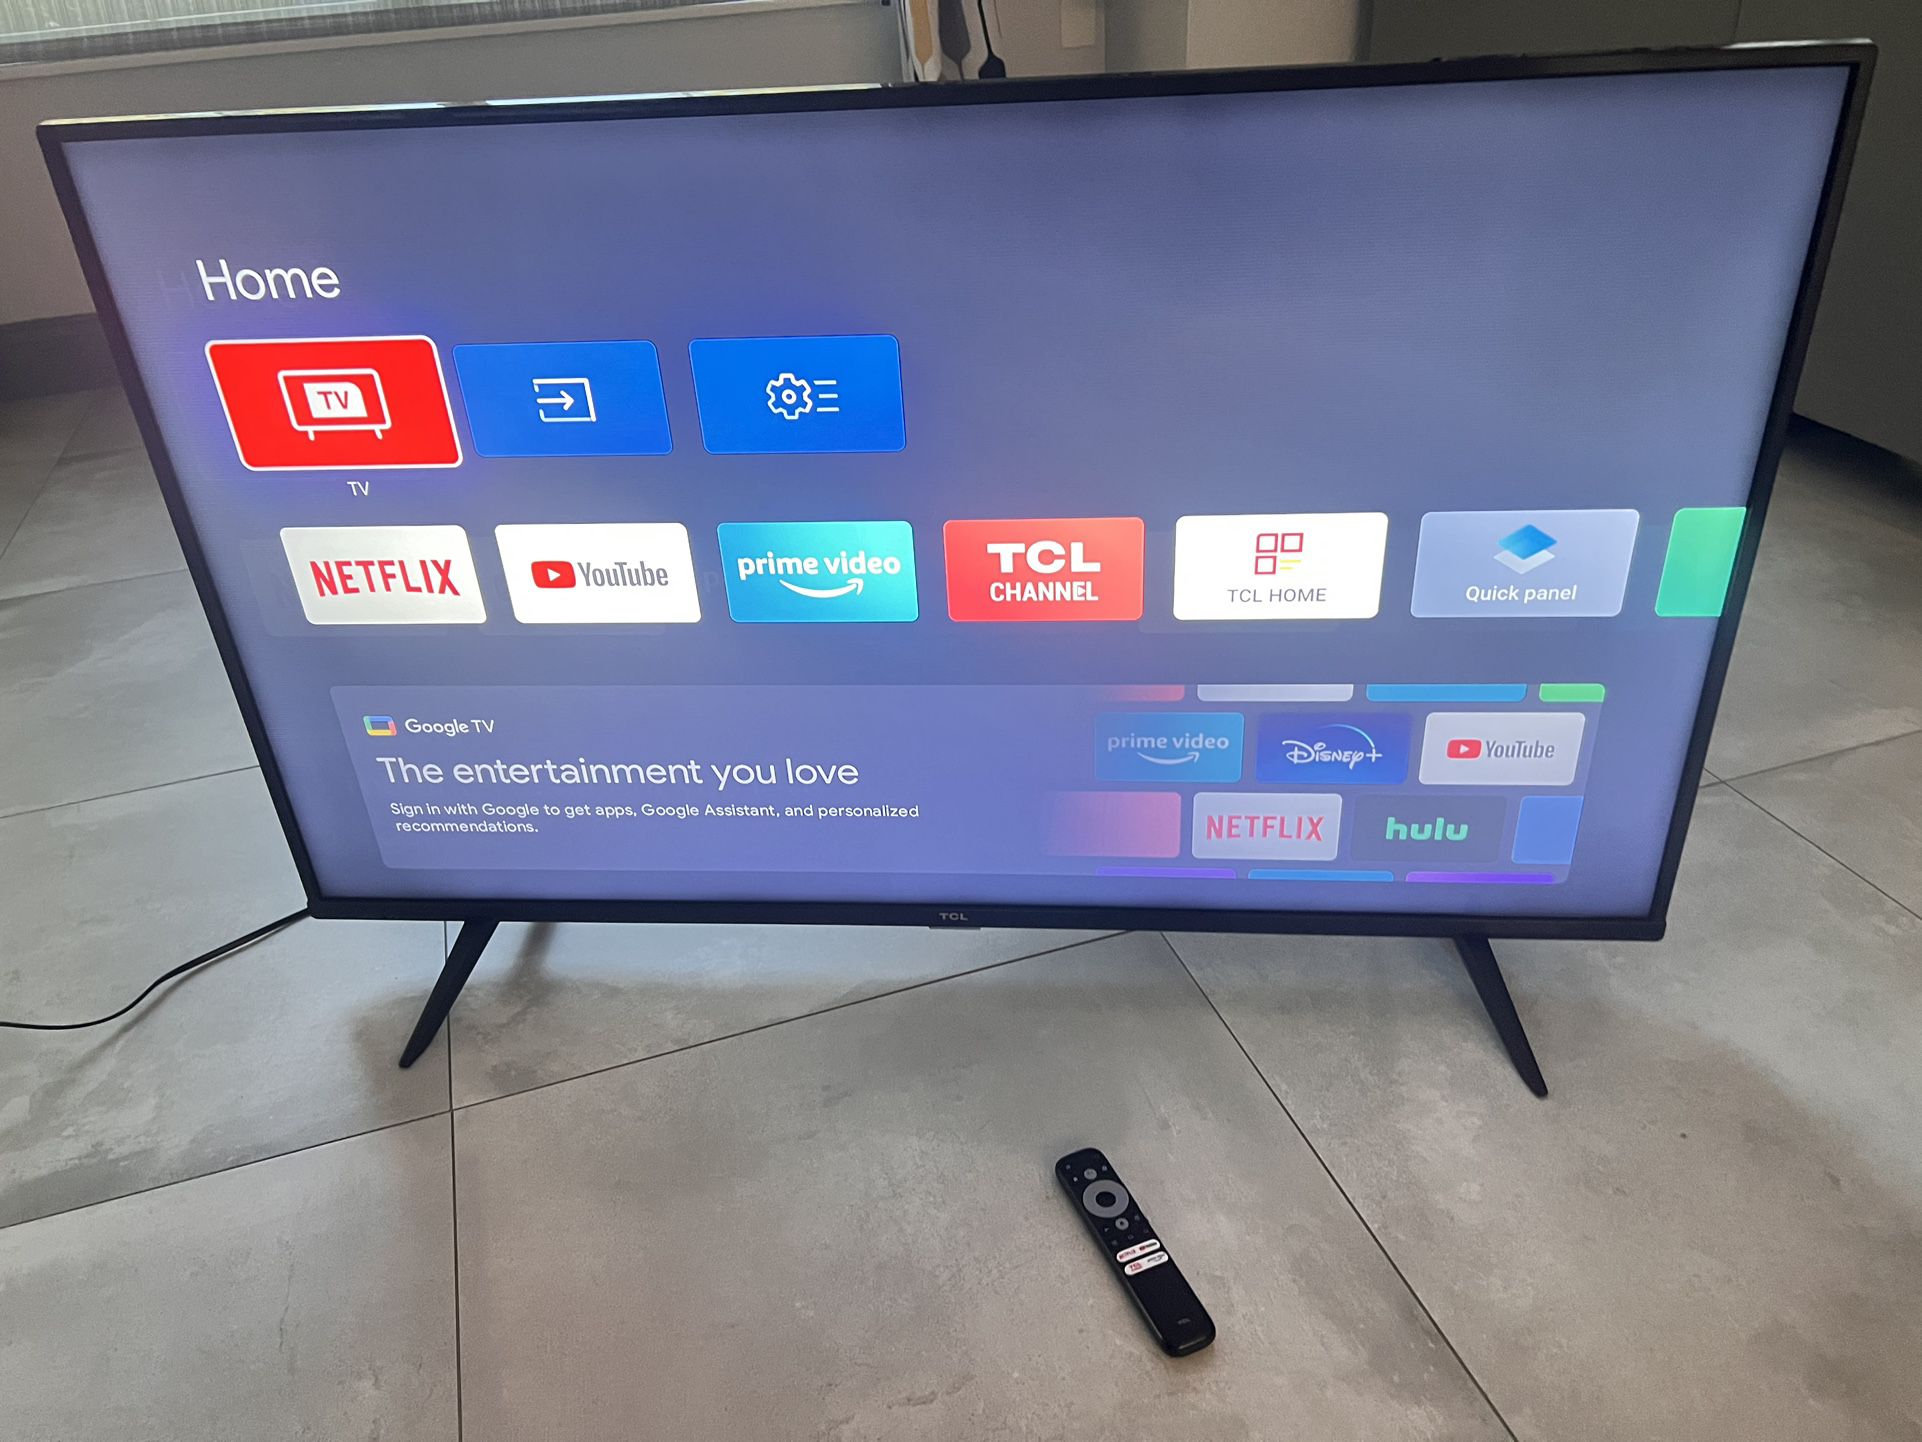 50” TCL FLAT SCREEN SMART TV WITH VOICE REMOTE